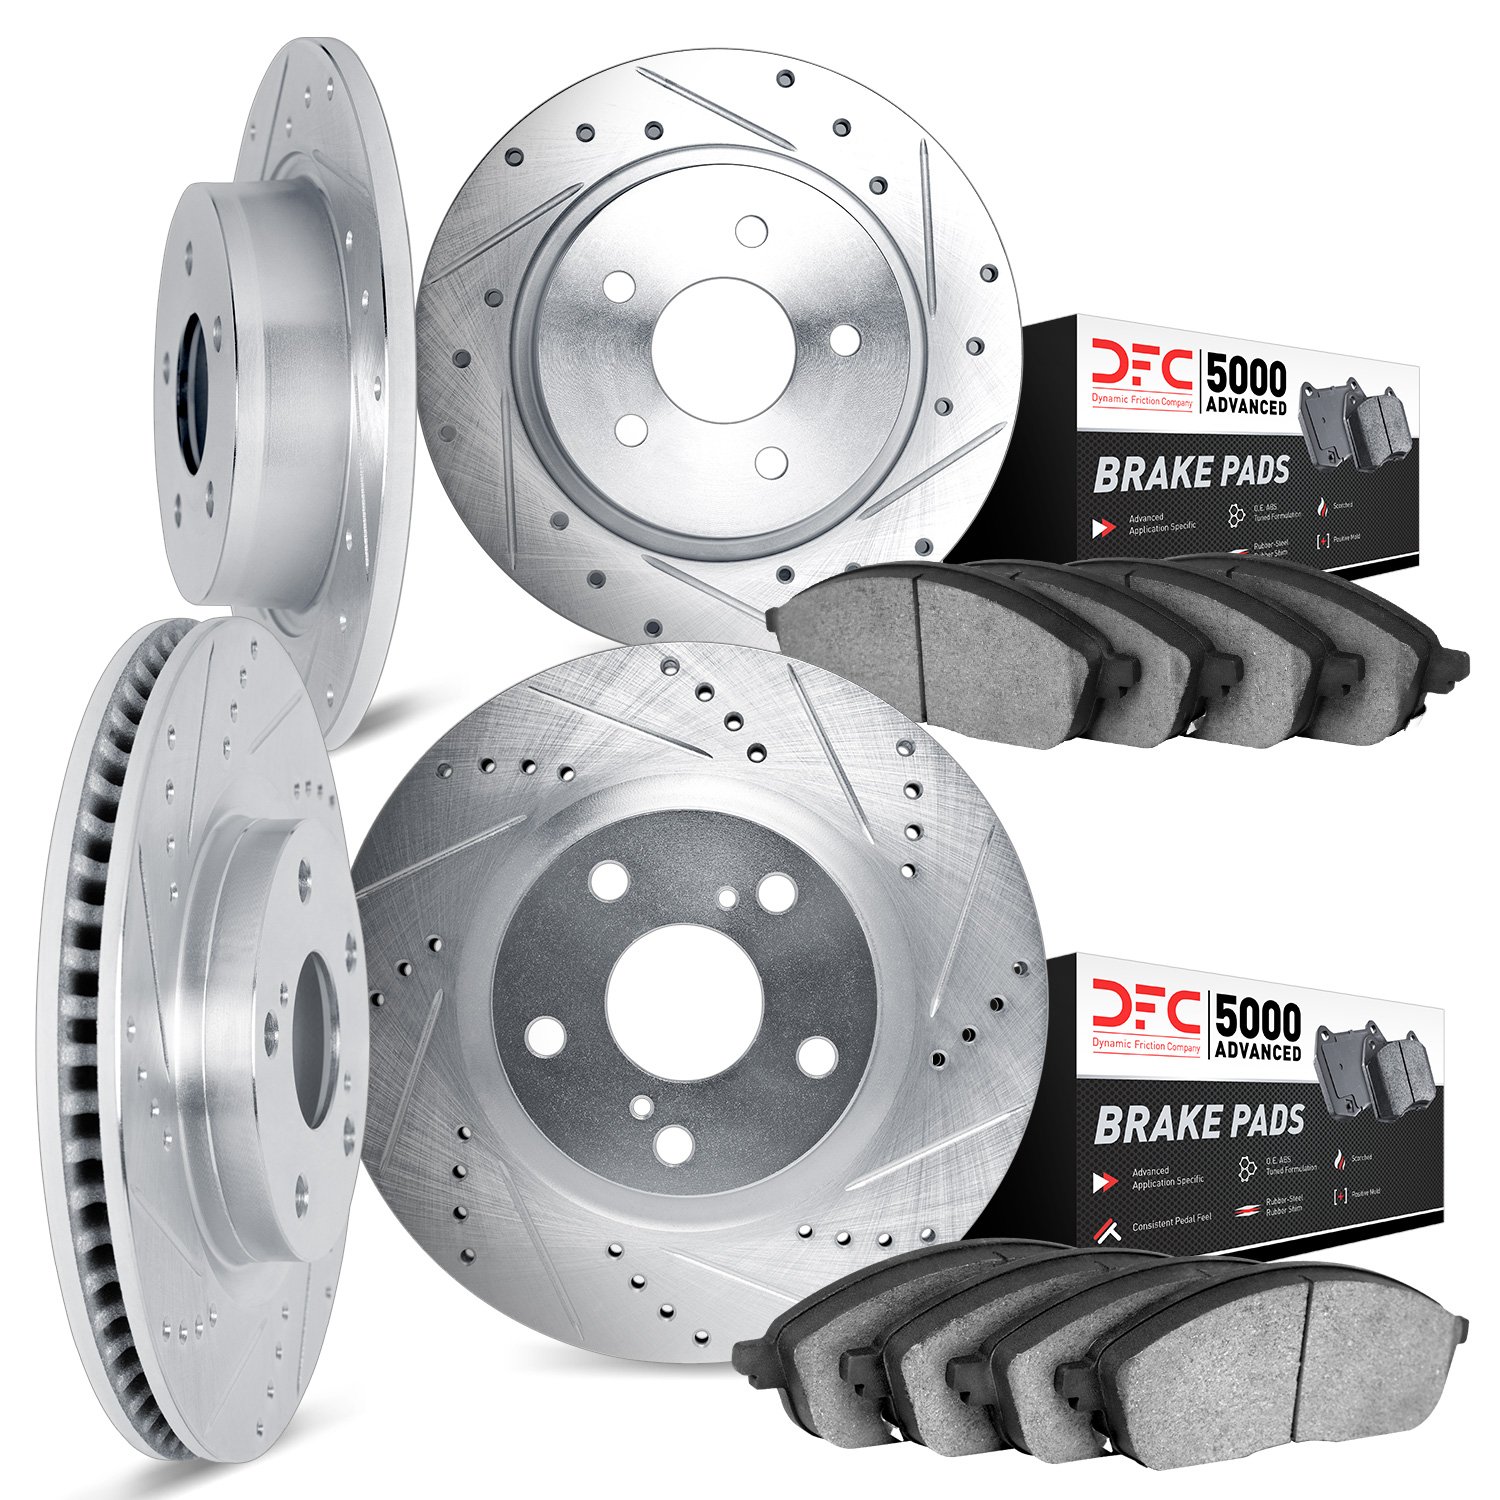 7504-76133 Drilled/Slotted Brake Rotors w/5000 Advanced Brake Pads Kit [Silver], 2000-2001 Lexus/Toyota/Scion, Position: Front a